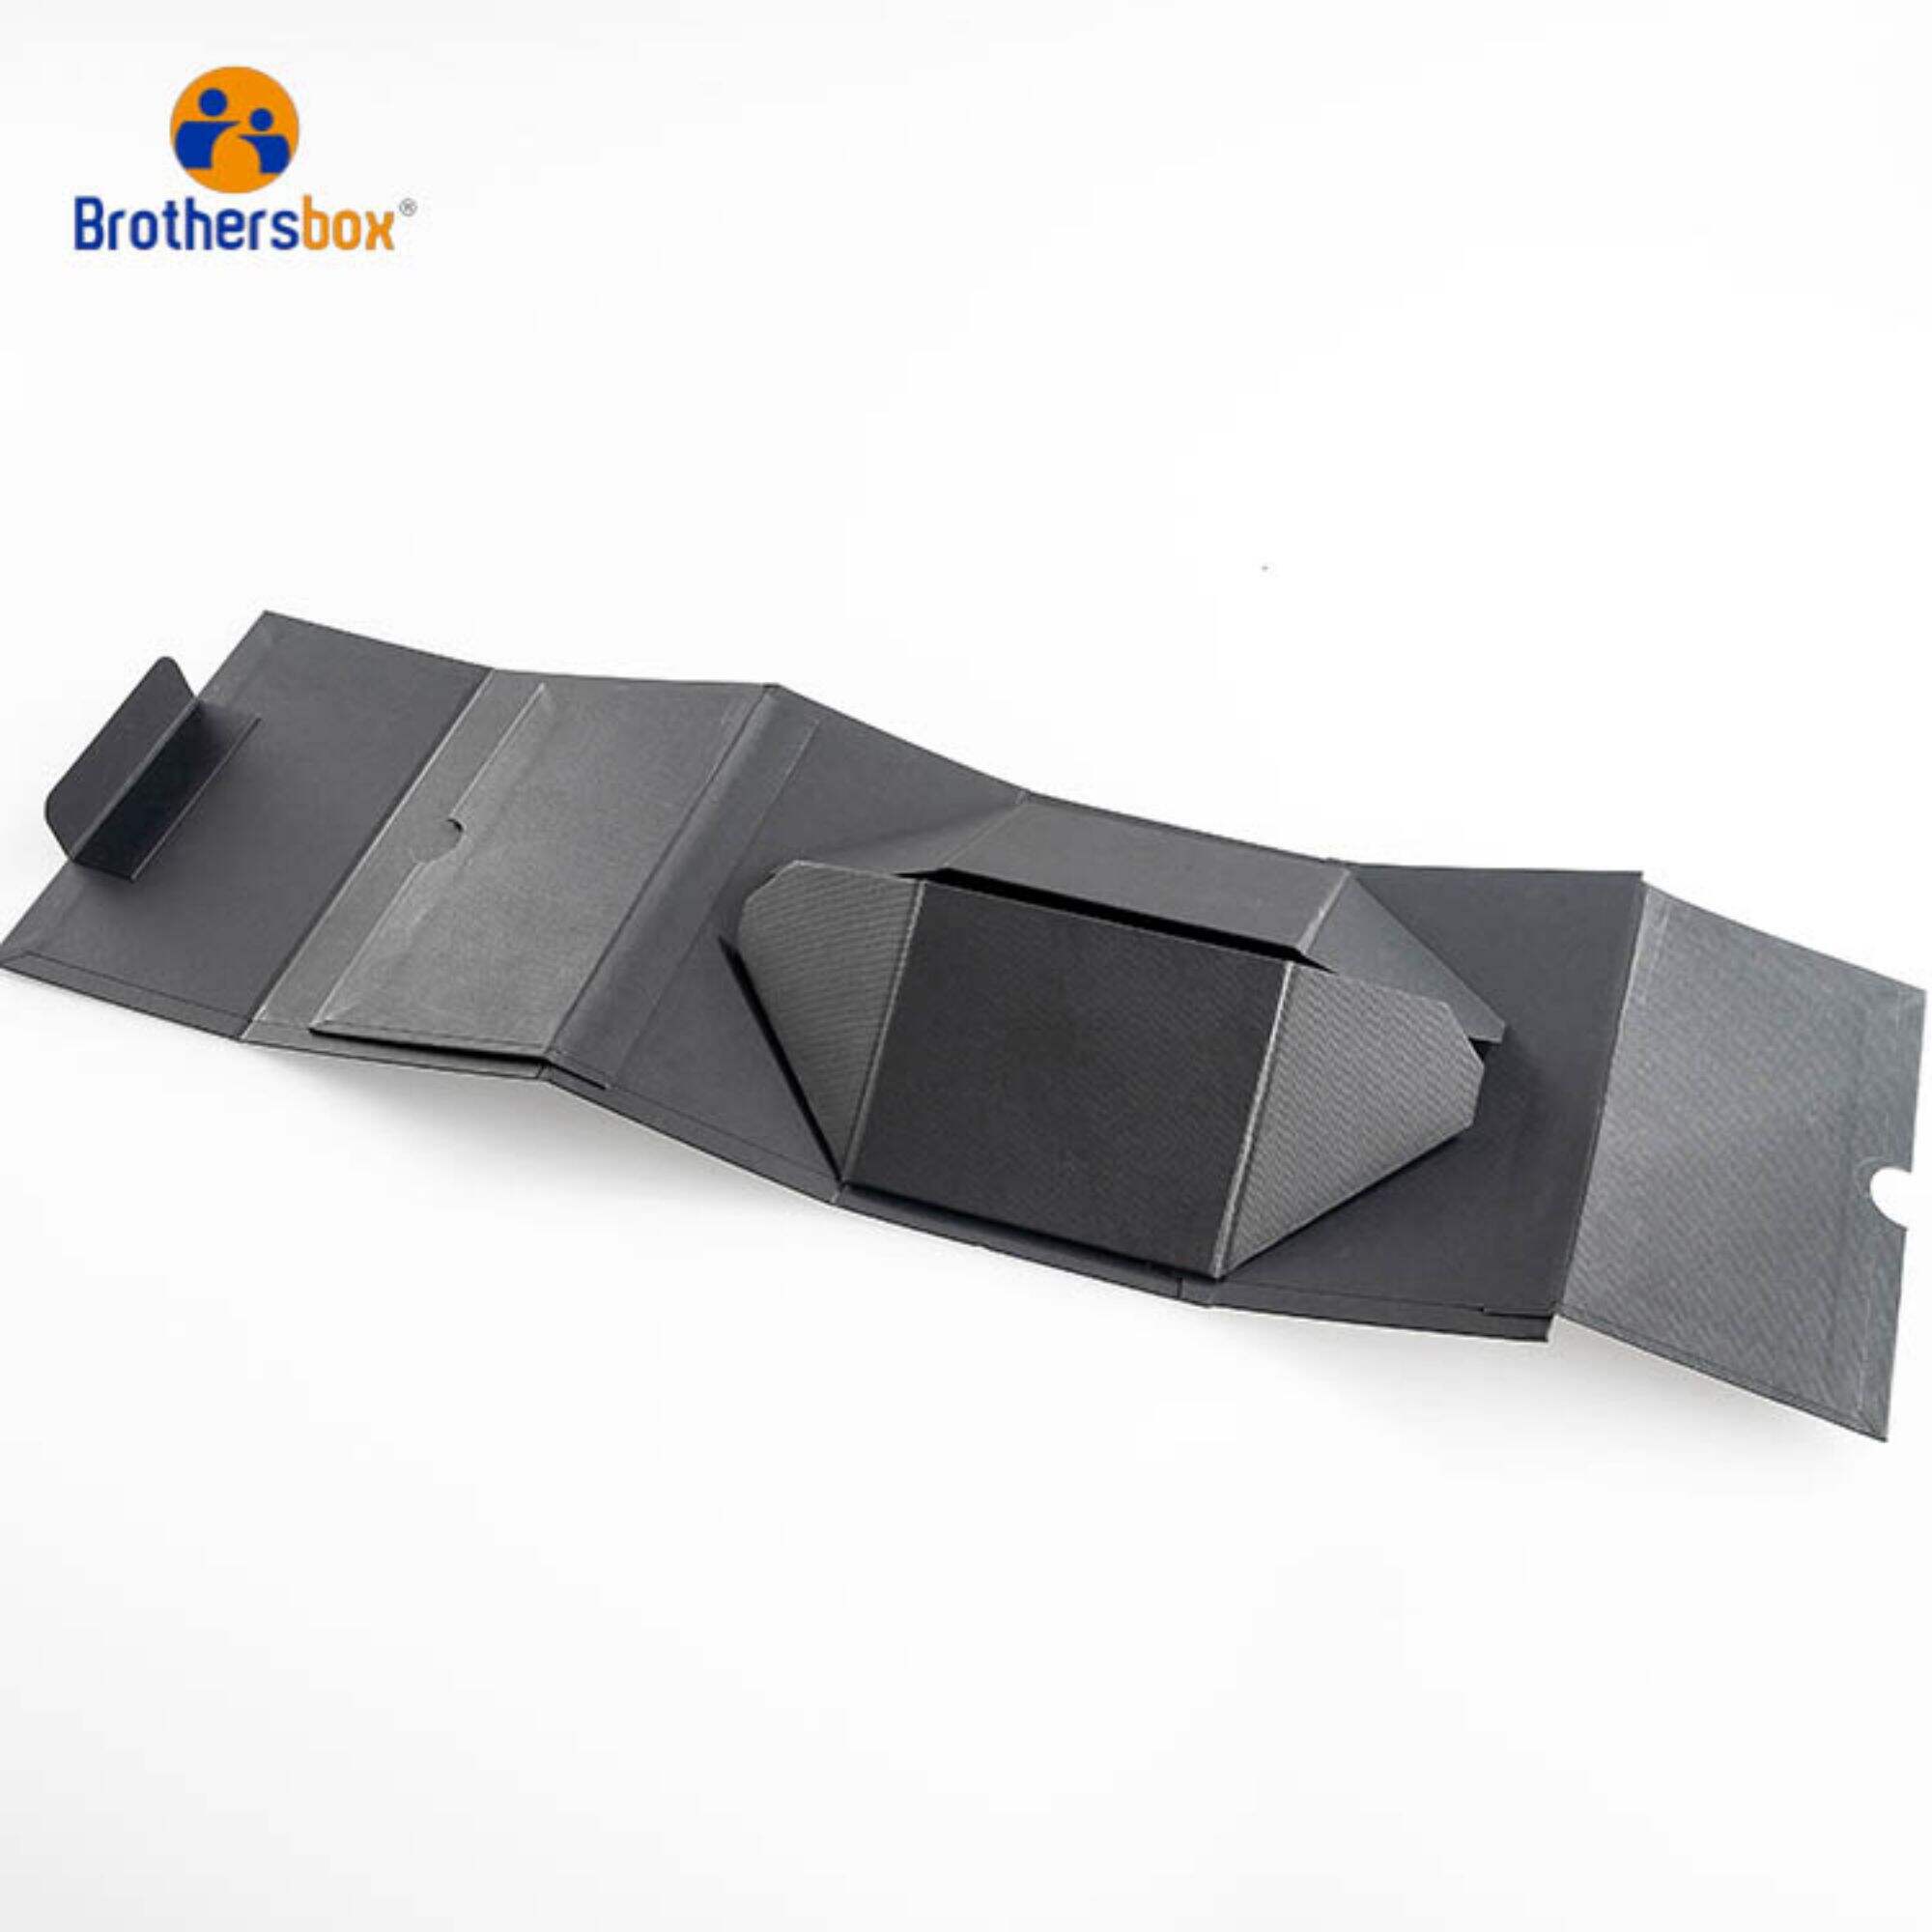 Rigid Paper Flat Collapsible Black Foldable Packaging Box